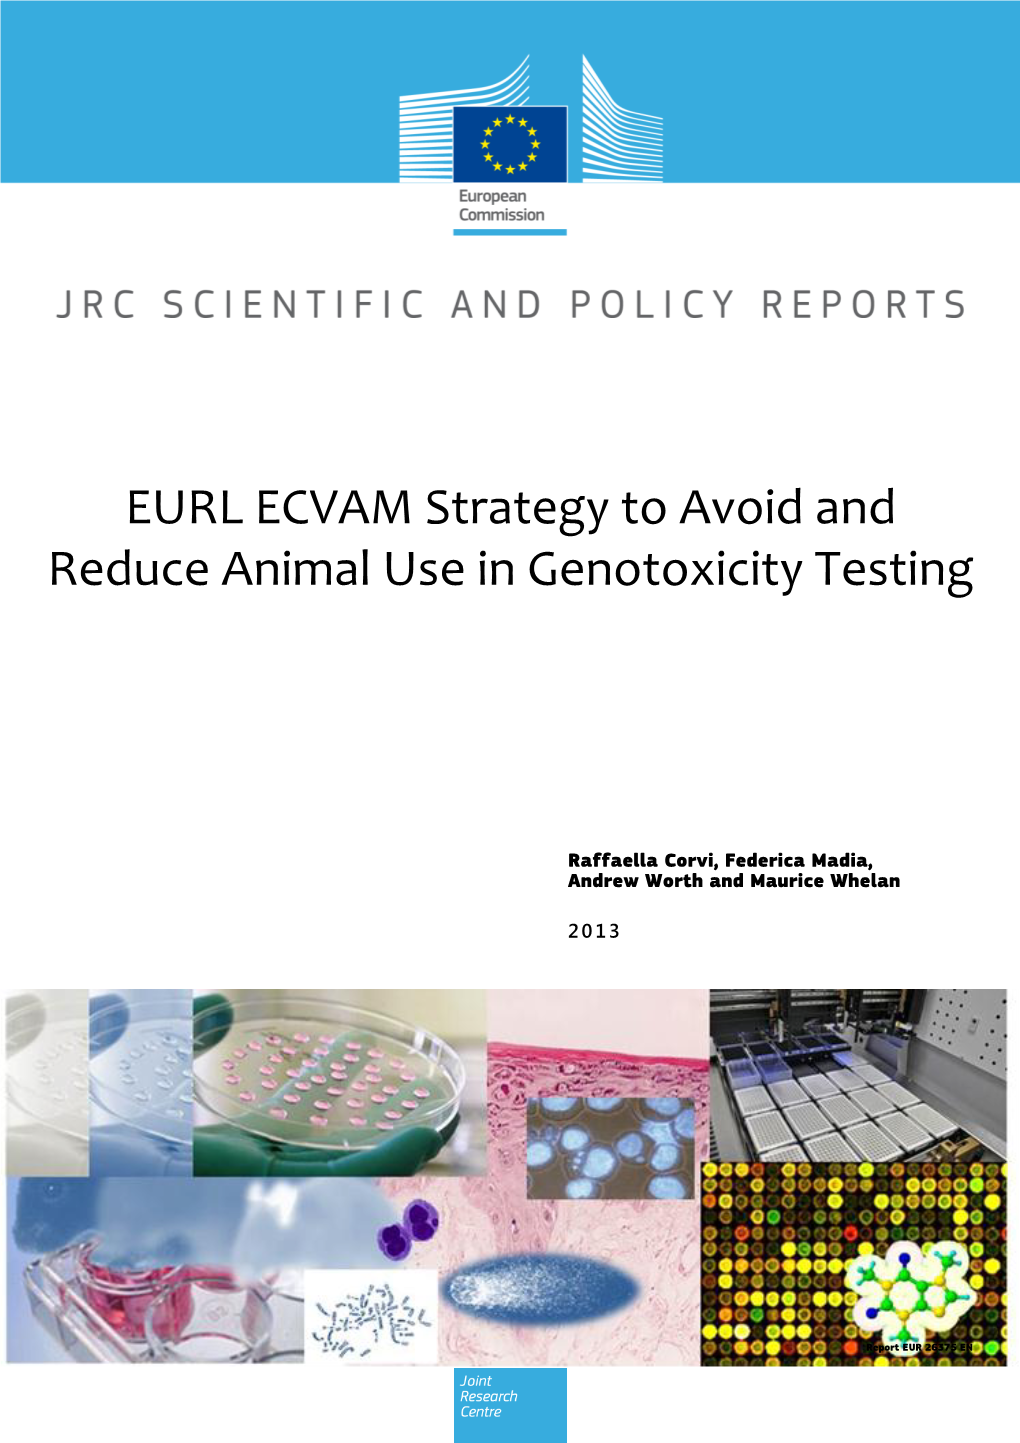 EURL ECVAM Strategy to Avoid and Reduce Animal Use in Genotoxicity Testing